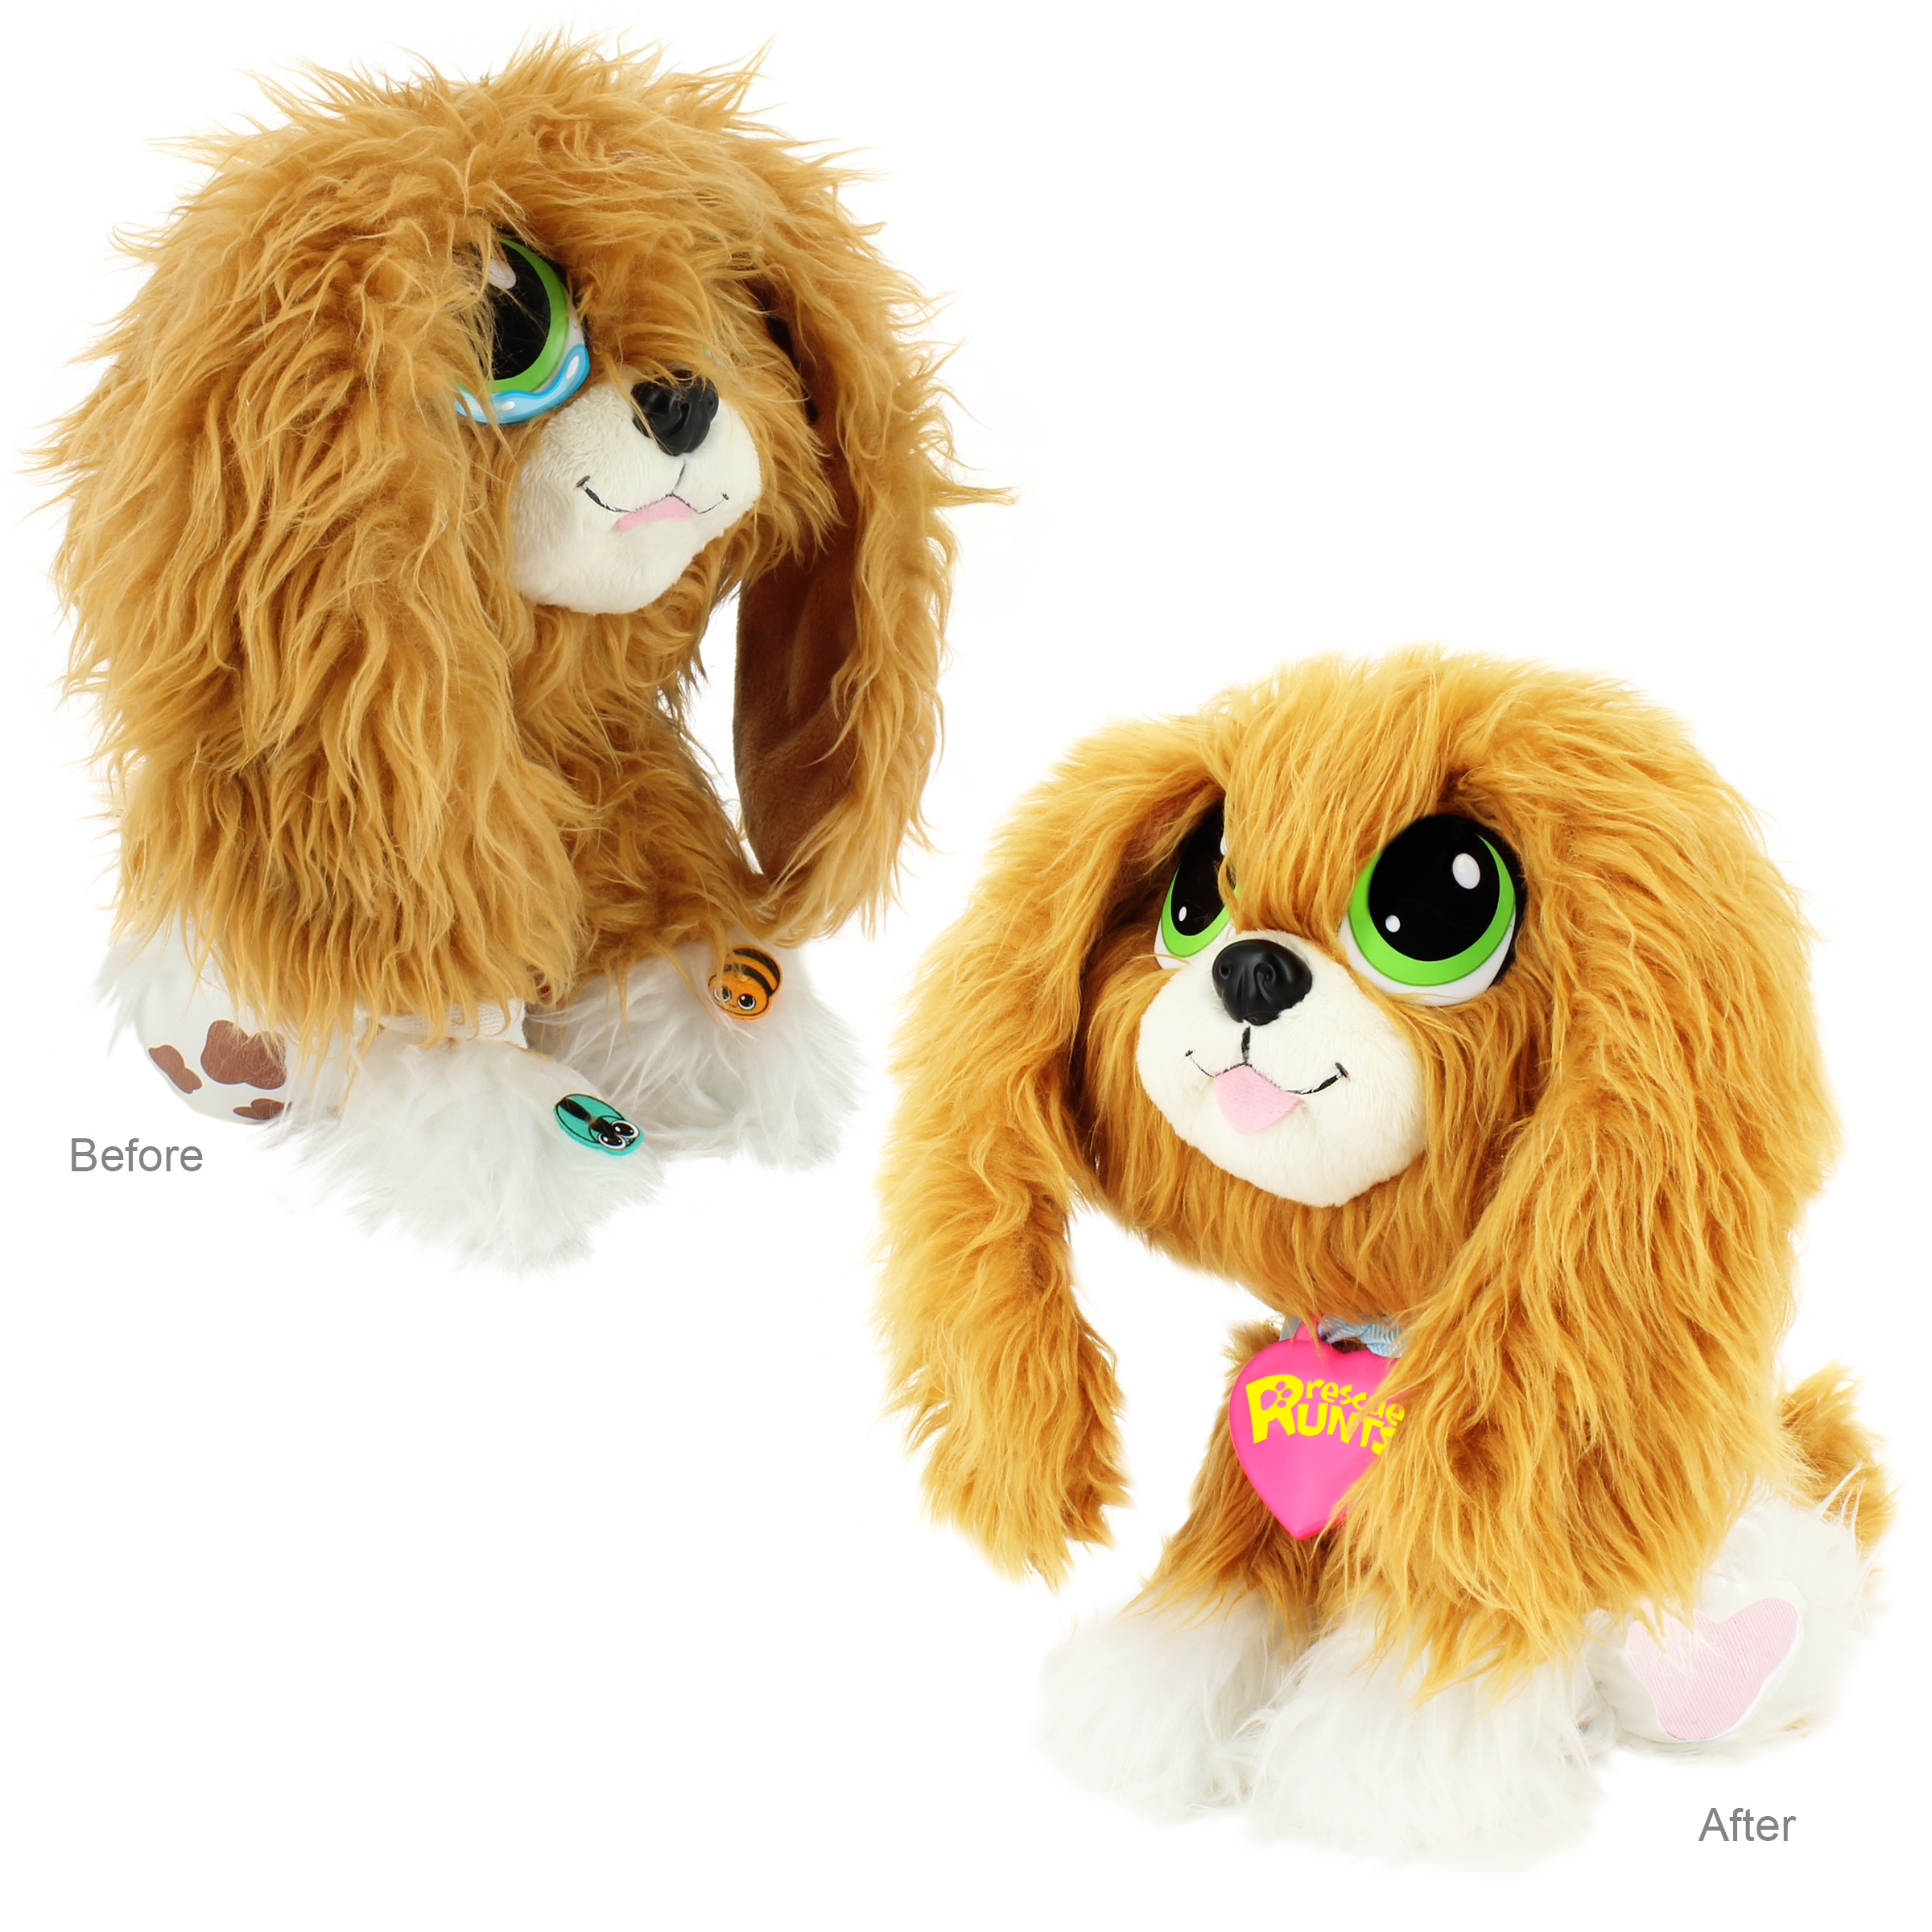 Rescue runts - spaniel - rescue dog plush by kd kids - image 4 of 8